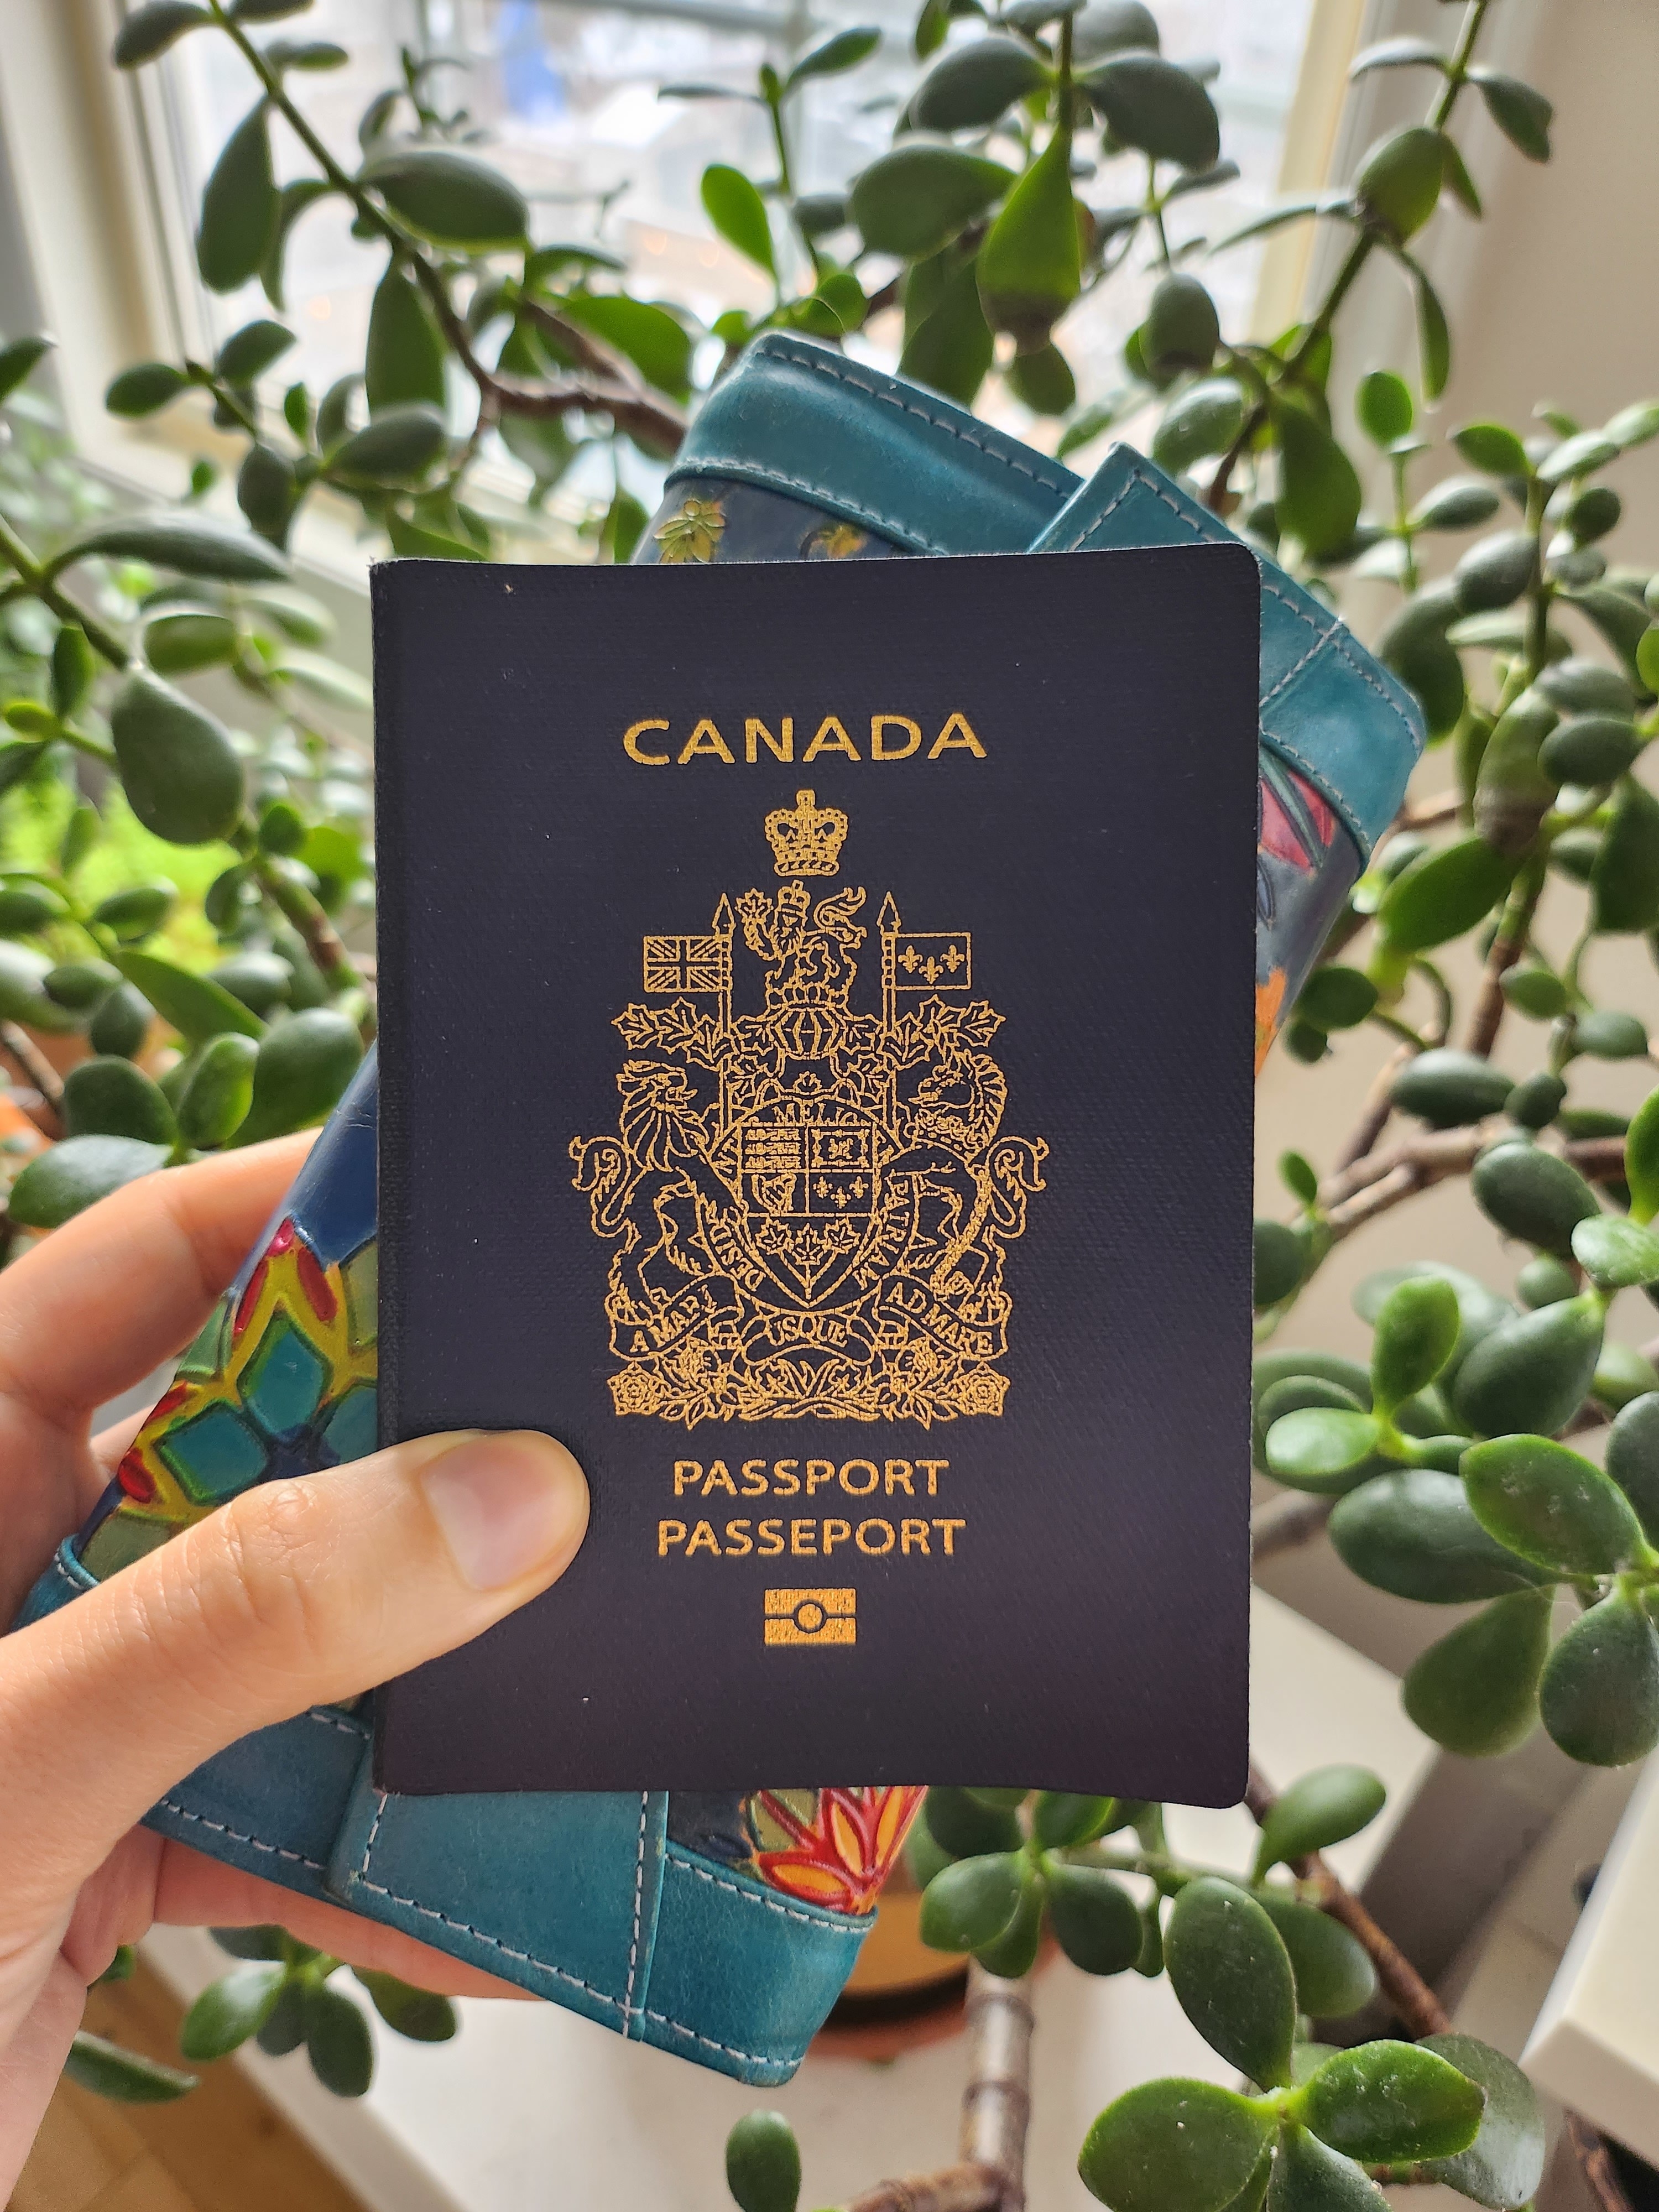 brittany holding up a canadian passport